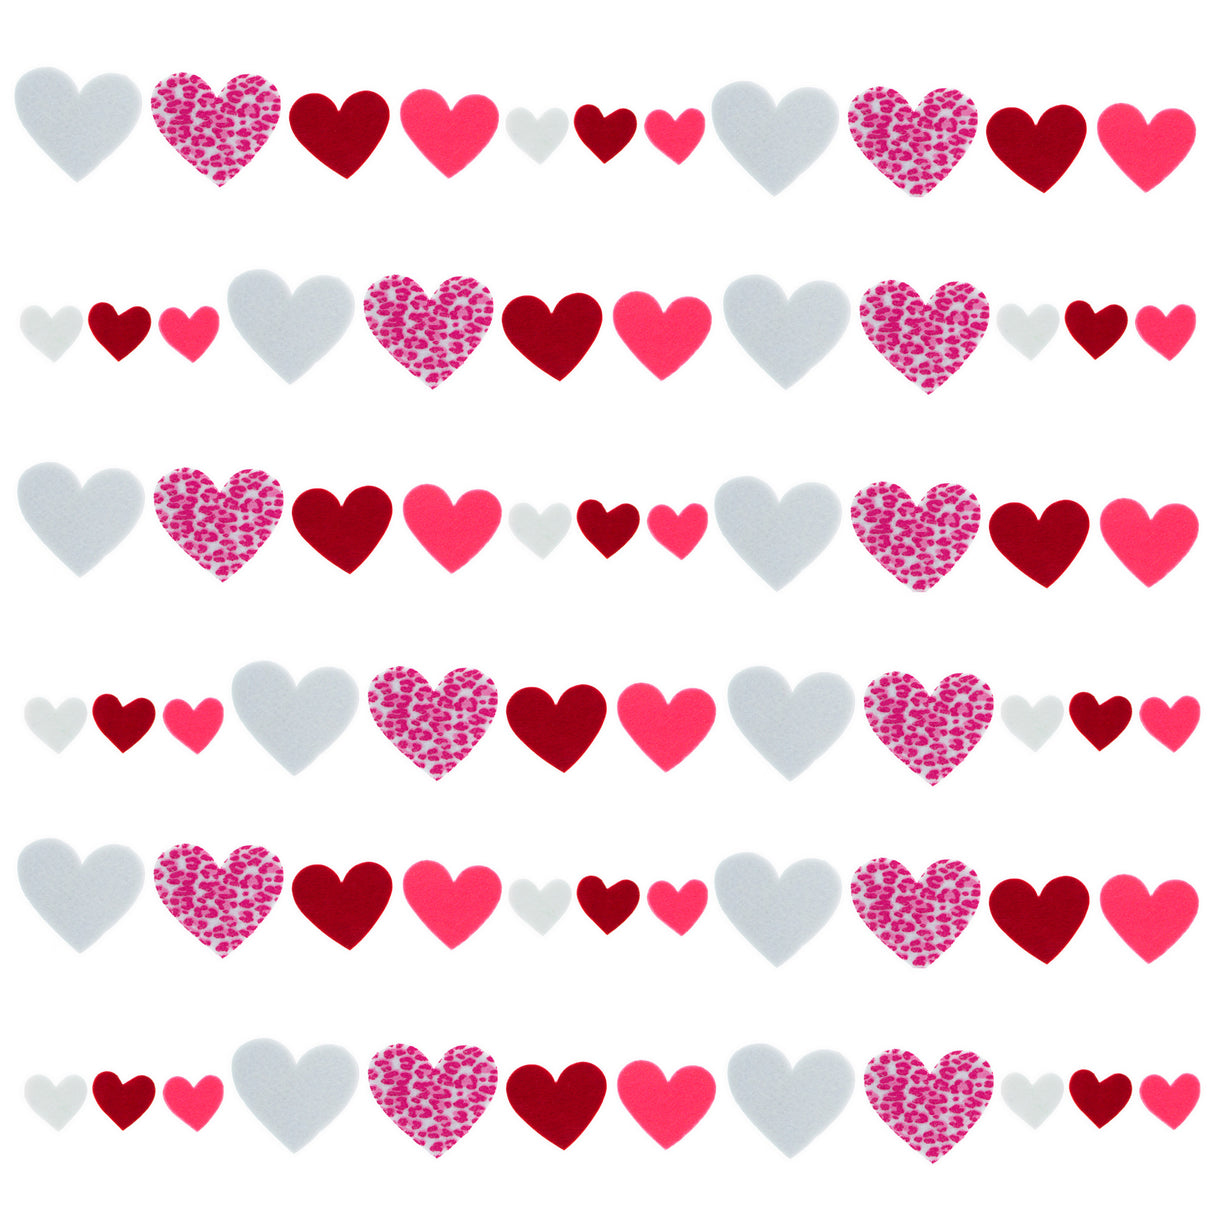 66 Piece Feltiest Felt Stickers Printed Hearts 2 Inches